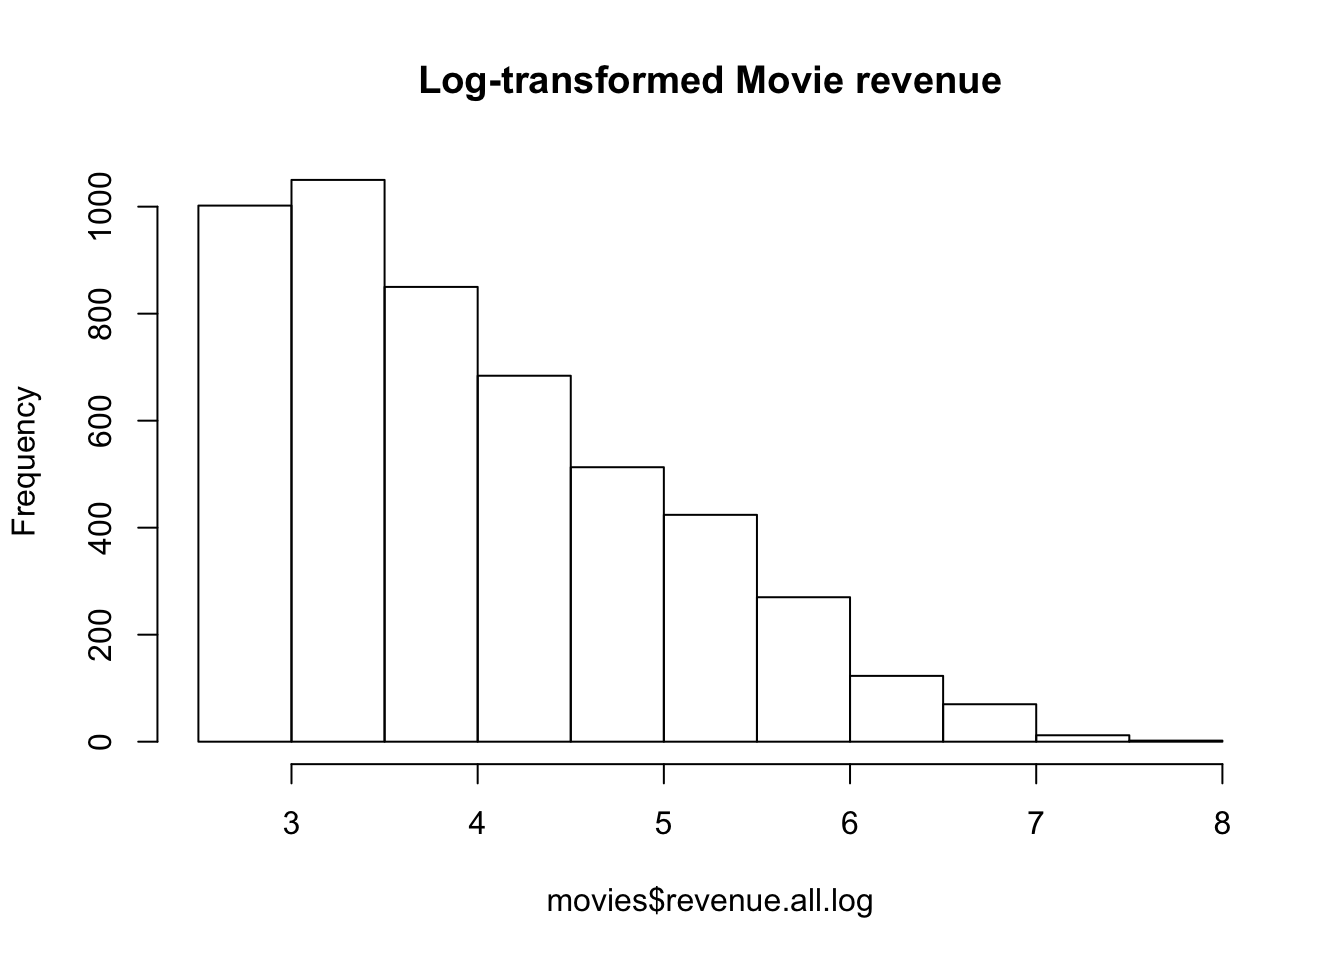 Distribution of log-transformed movie revenues. It's still skewed, but not nearly as badly as before.